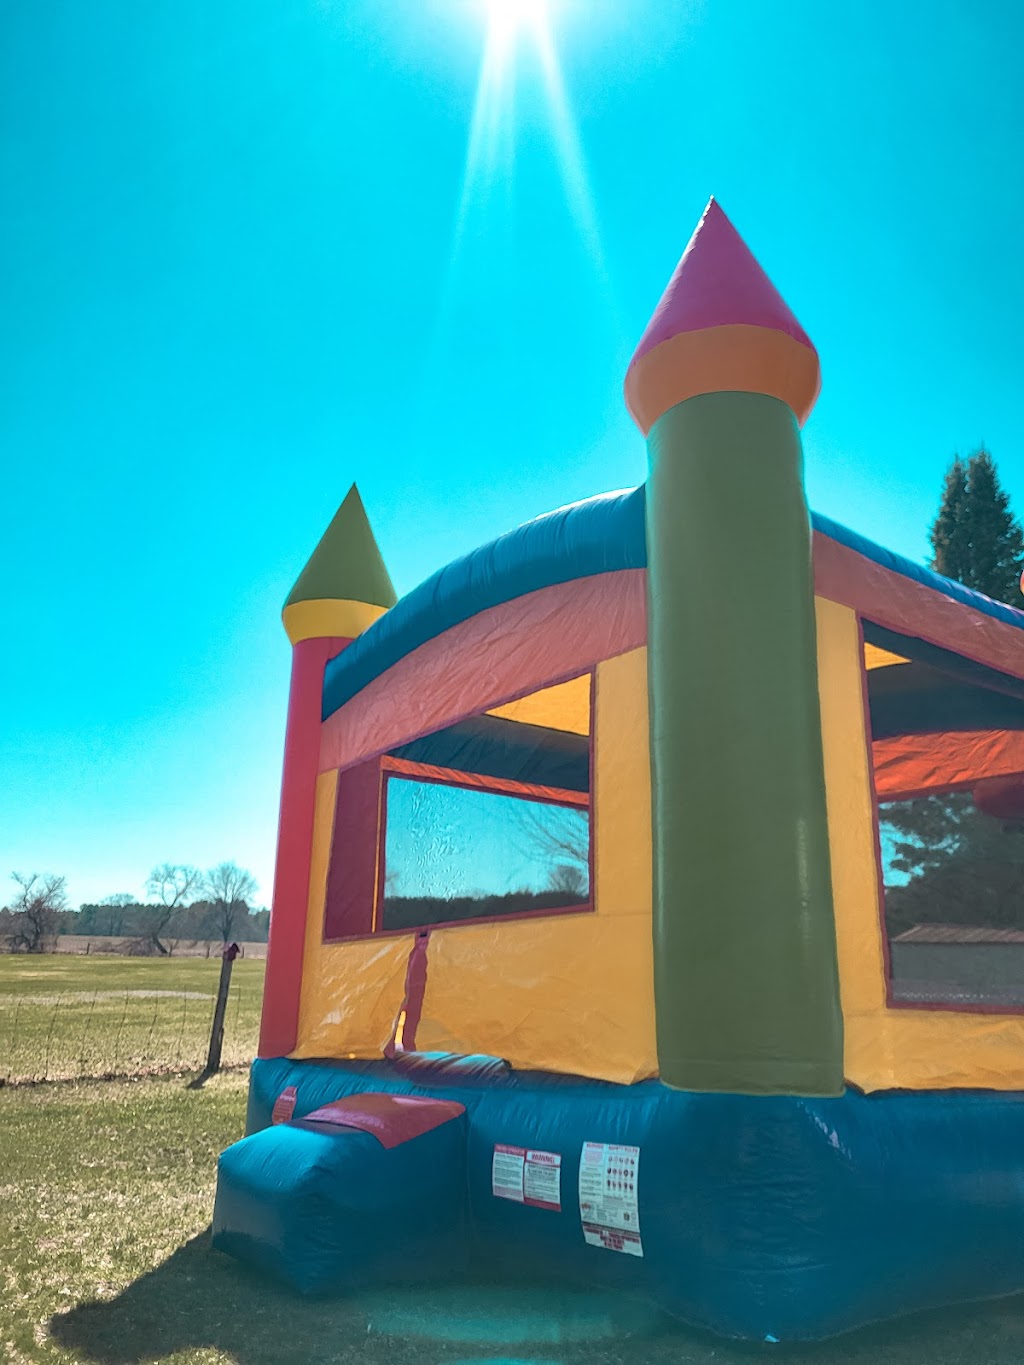 Always Bouncin Rentals | 642 Concession 8, Havelock, ON K0L 1Z0, Canada | Phone: (705) 772-7651